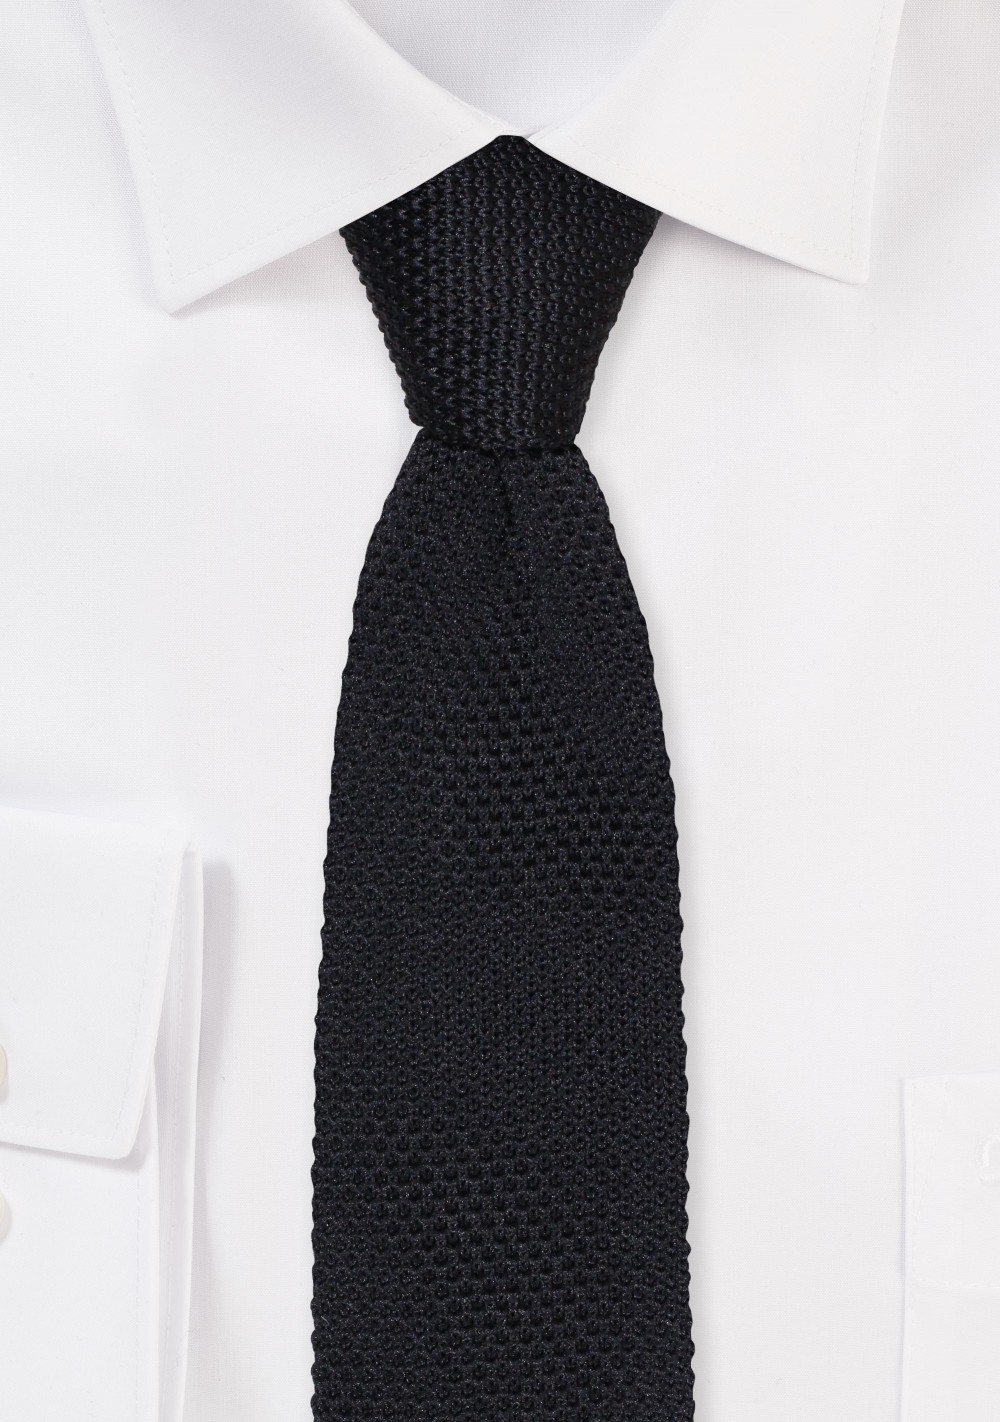 Black Knit Tie with Pointed Tip